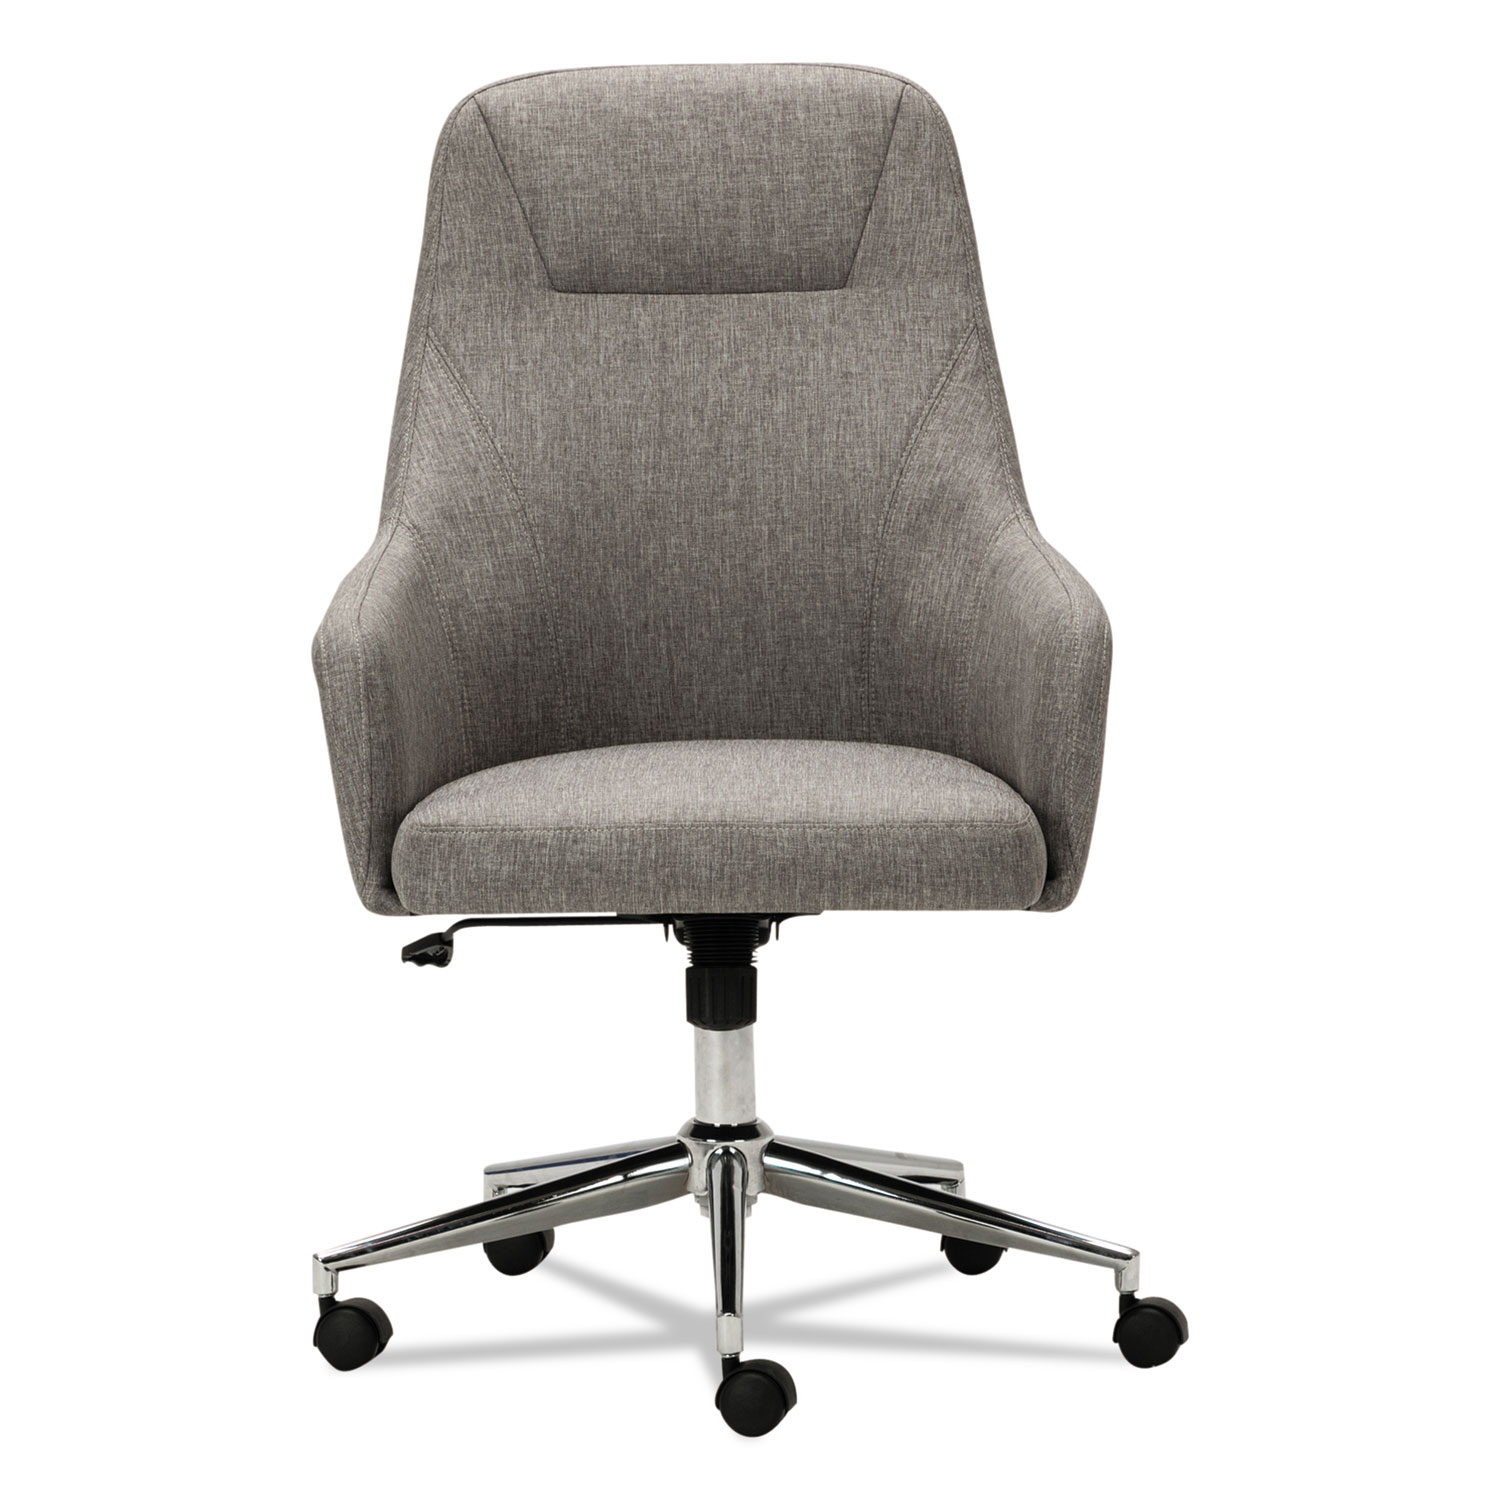 Captain Series High-Back Chair, Gray Tweed